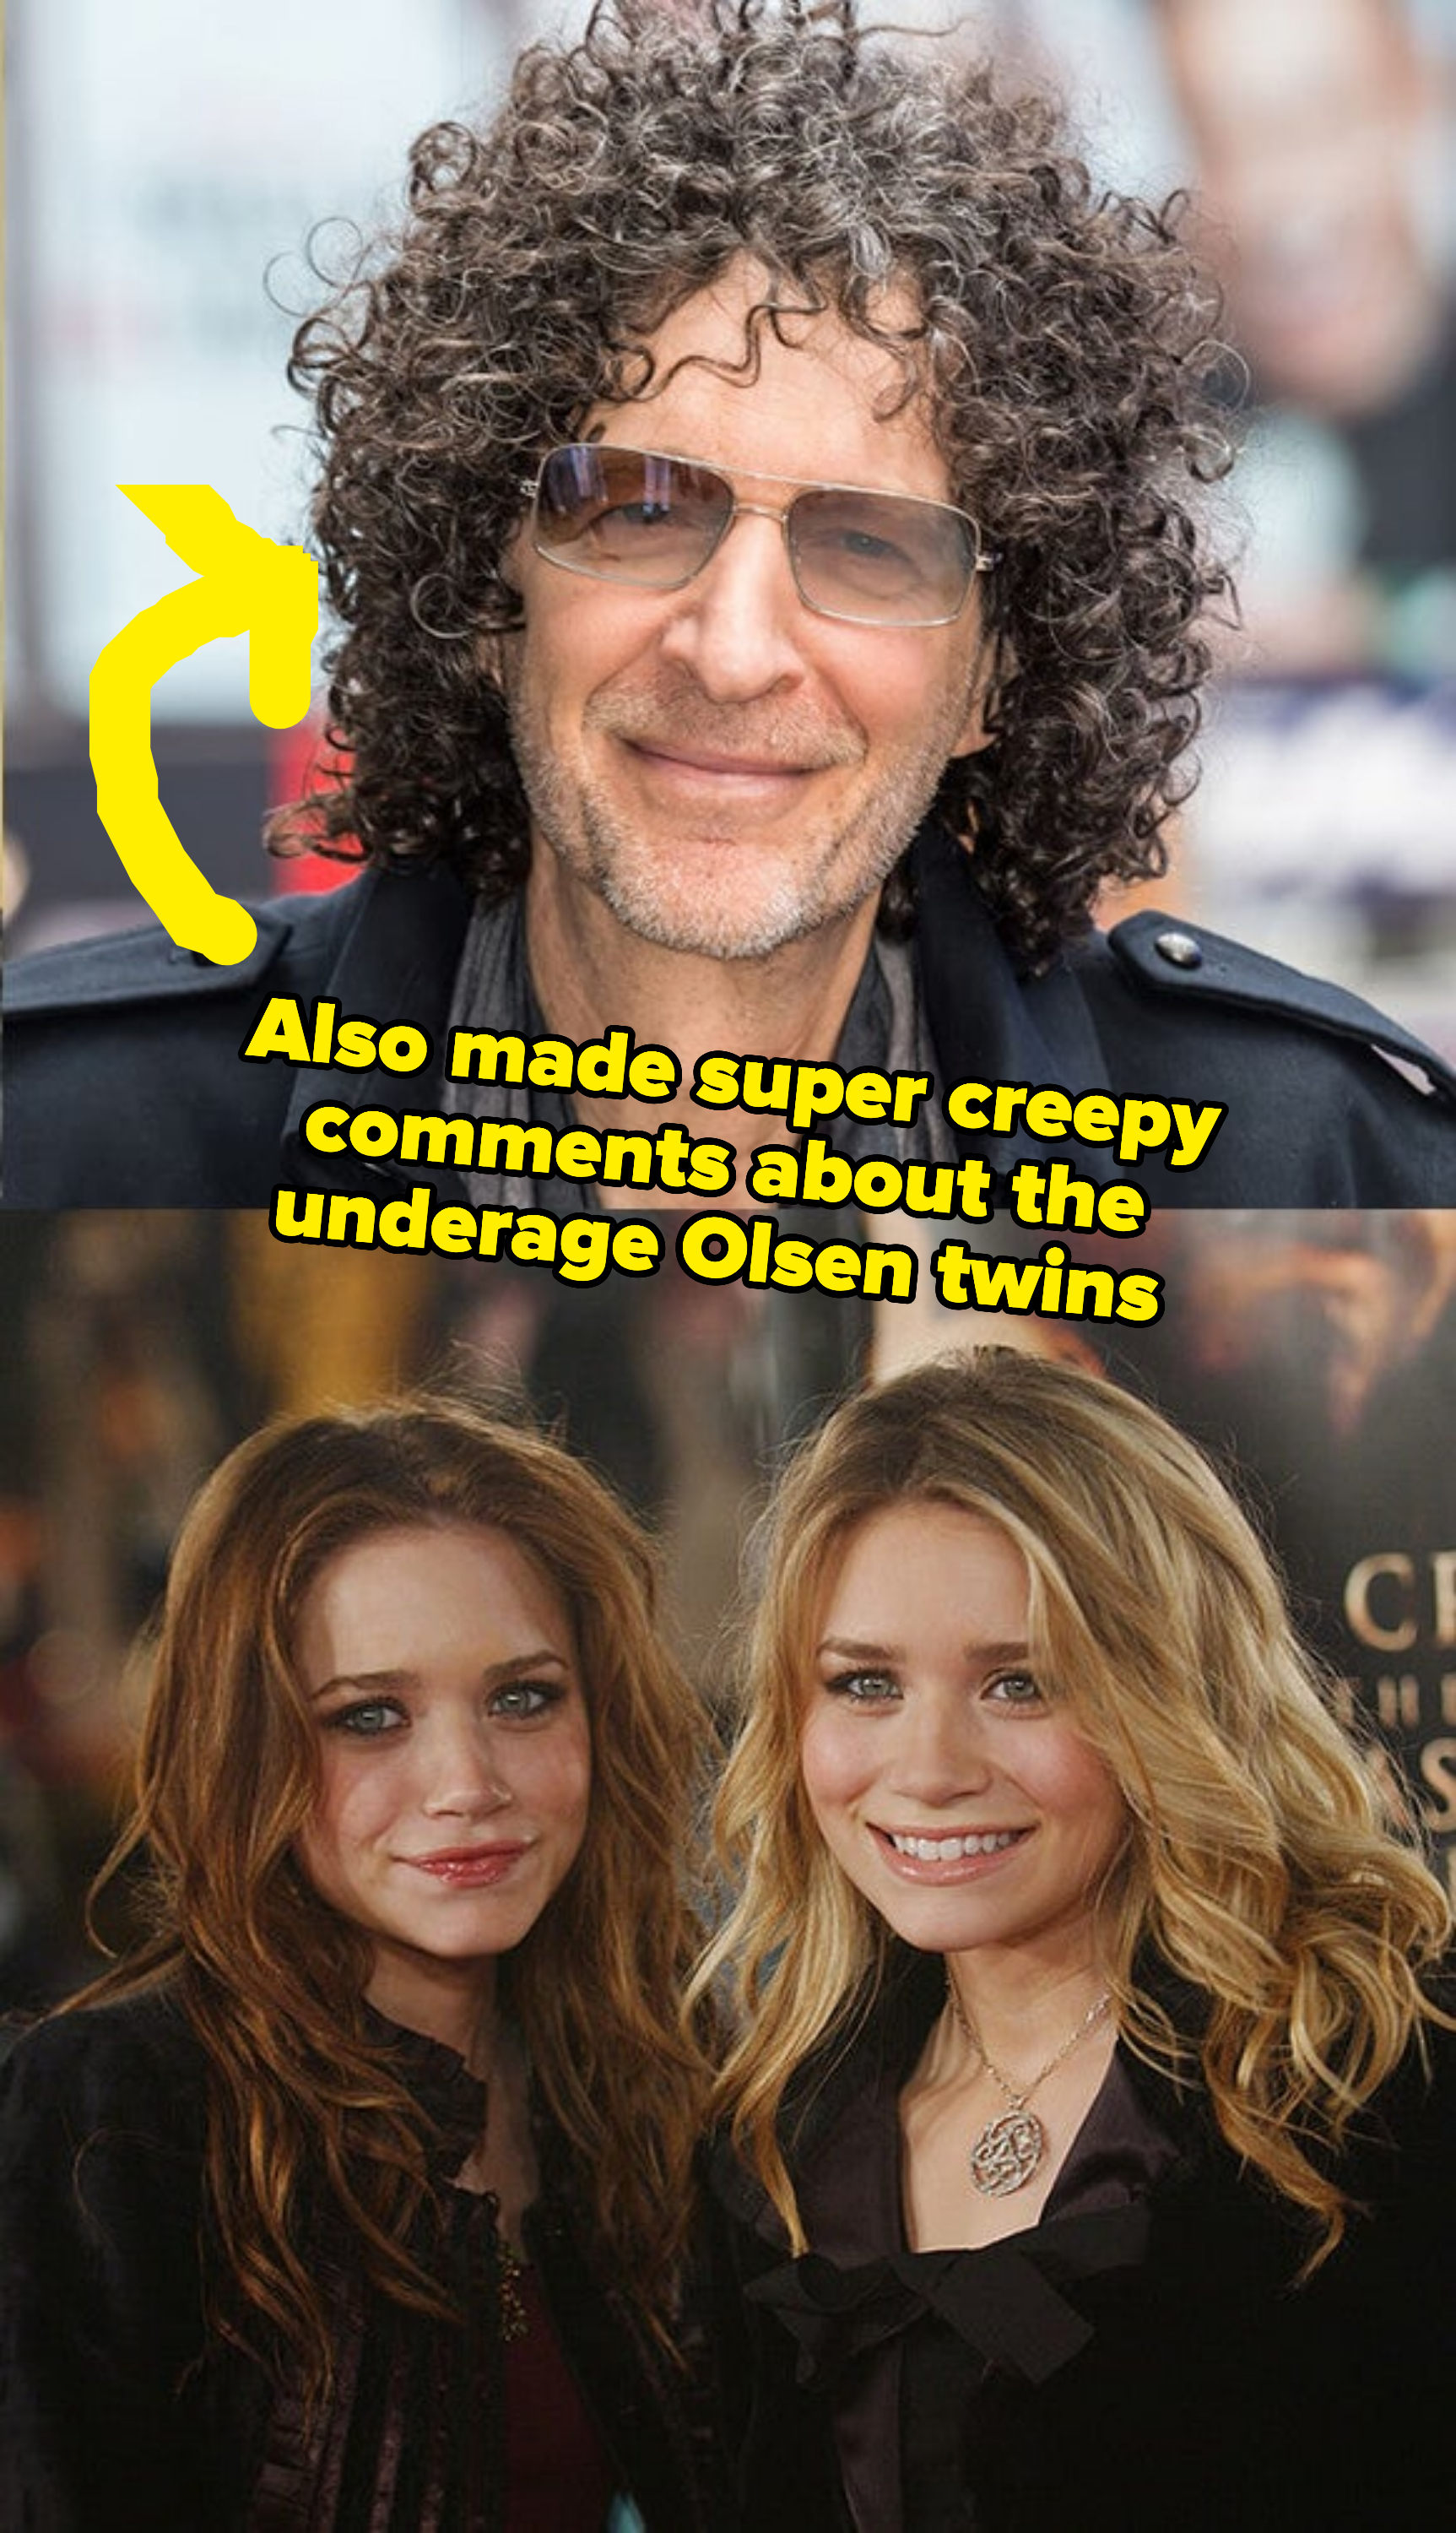 Screen grabs of Howard Stern and Mary-Kate and Ashley Olsen